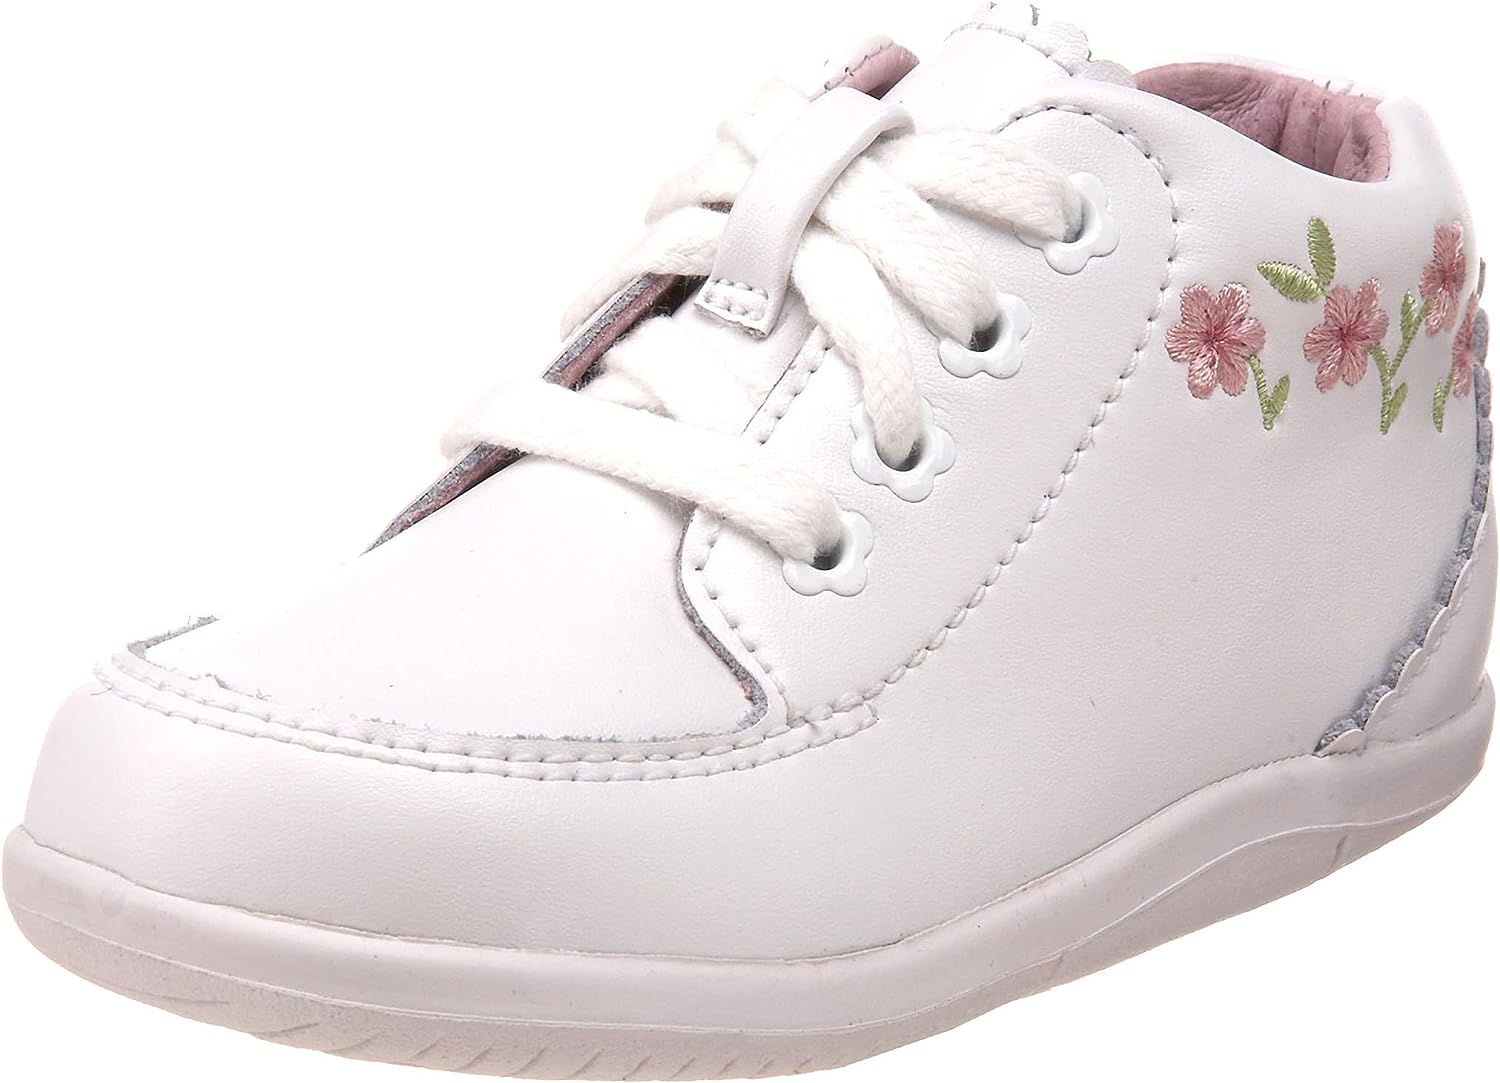 best shoes for babies beginning to walk